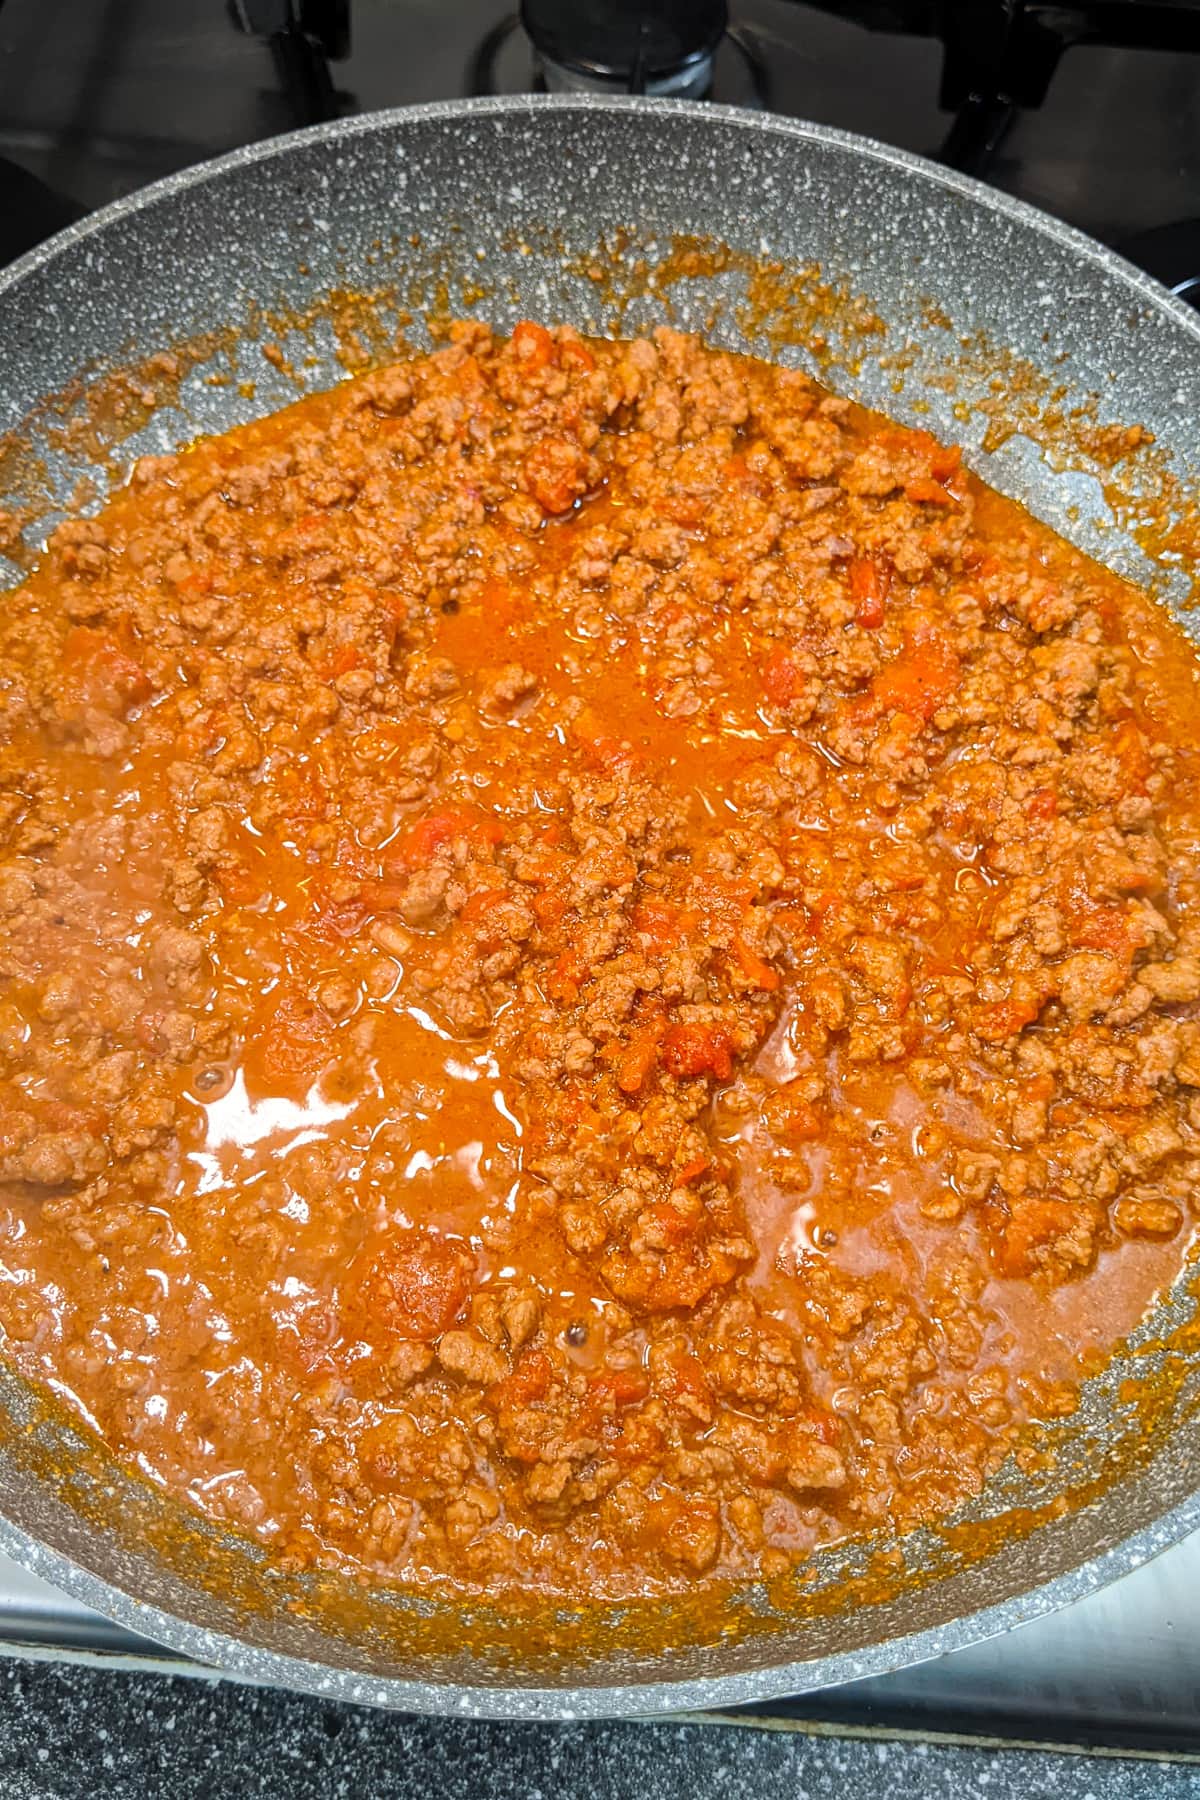 Ground beef sauce in a frying pan on the stove.